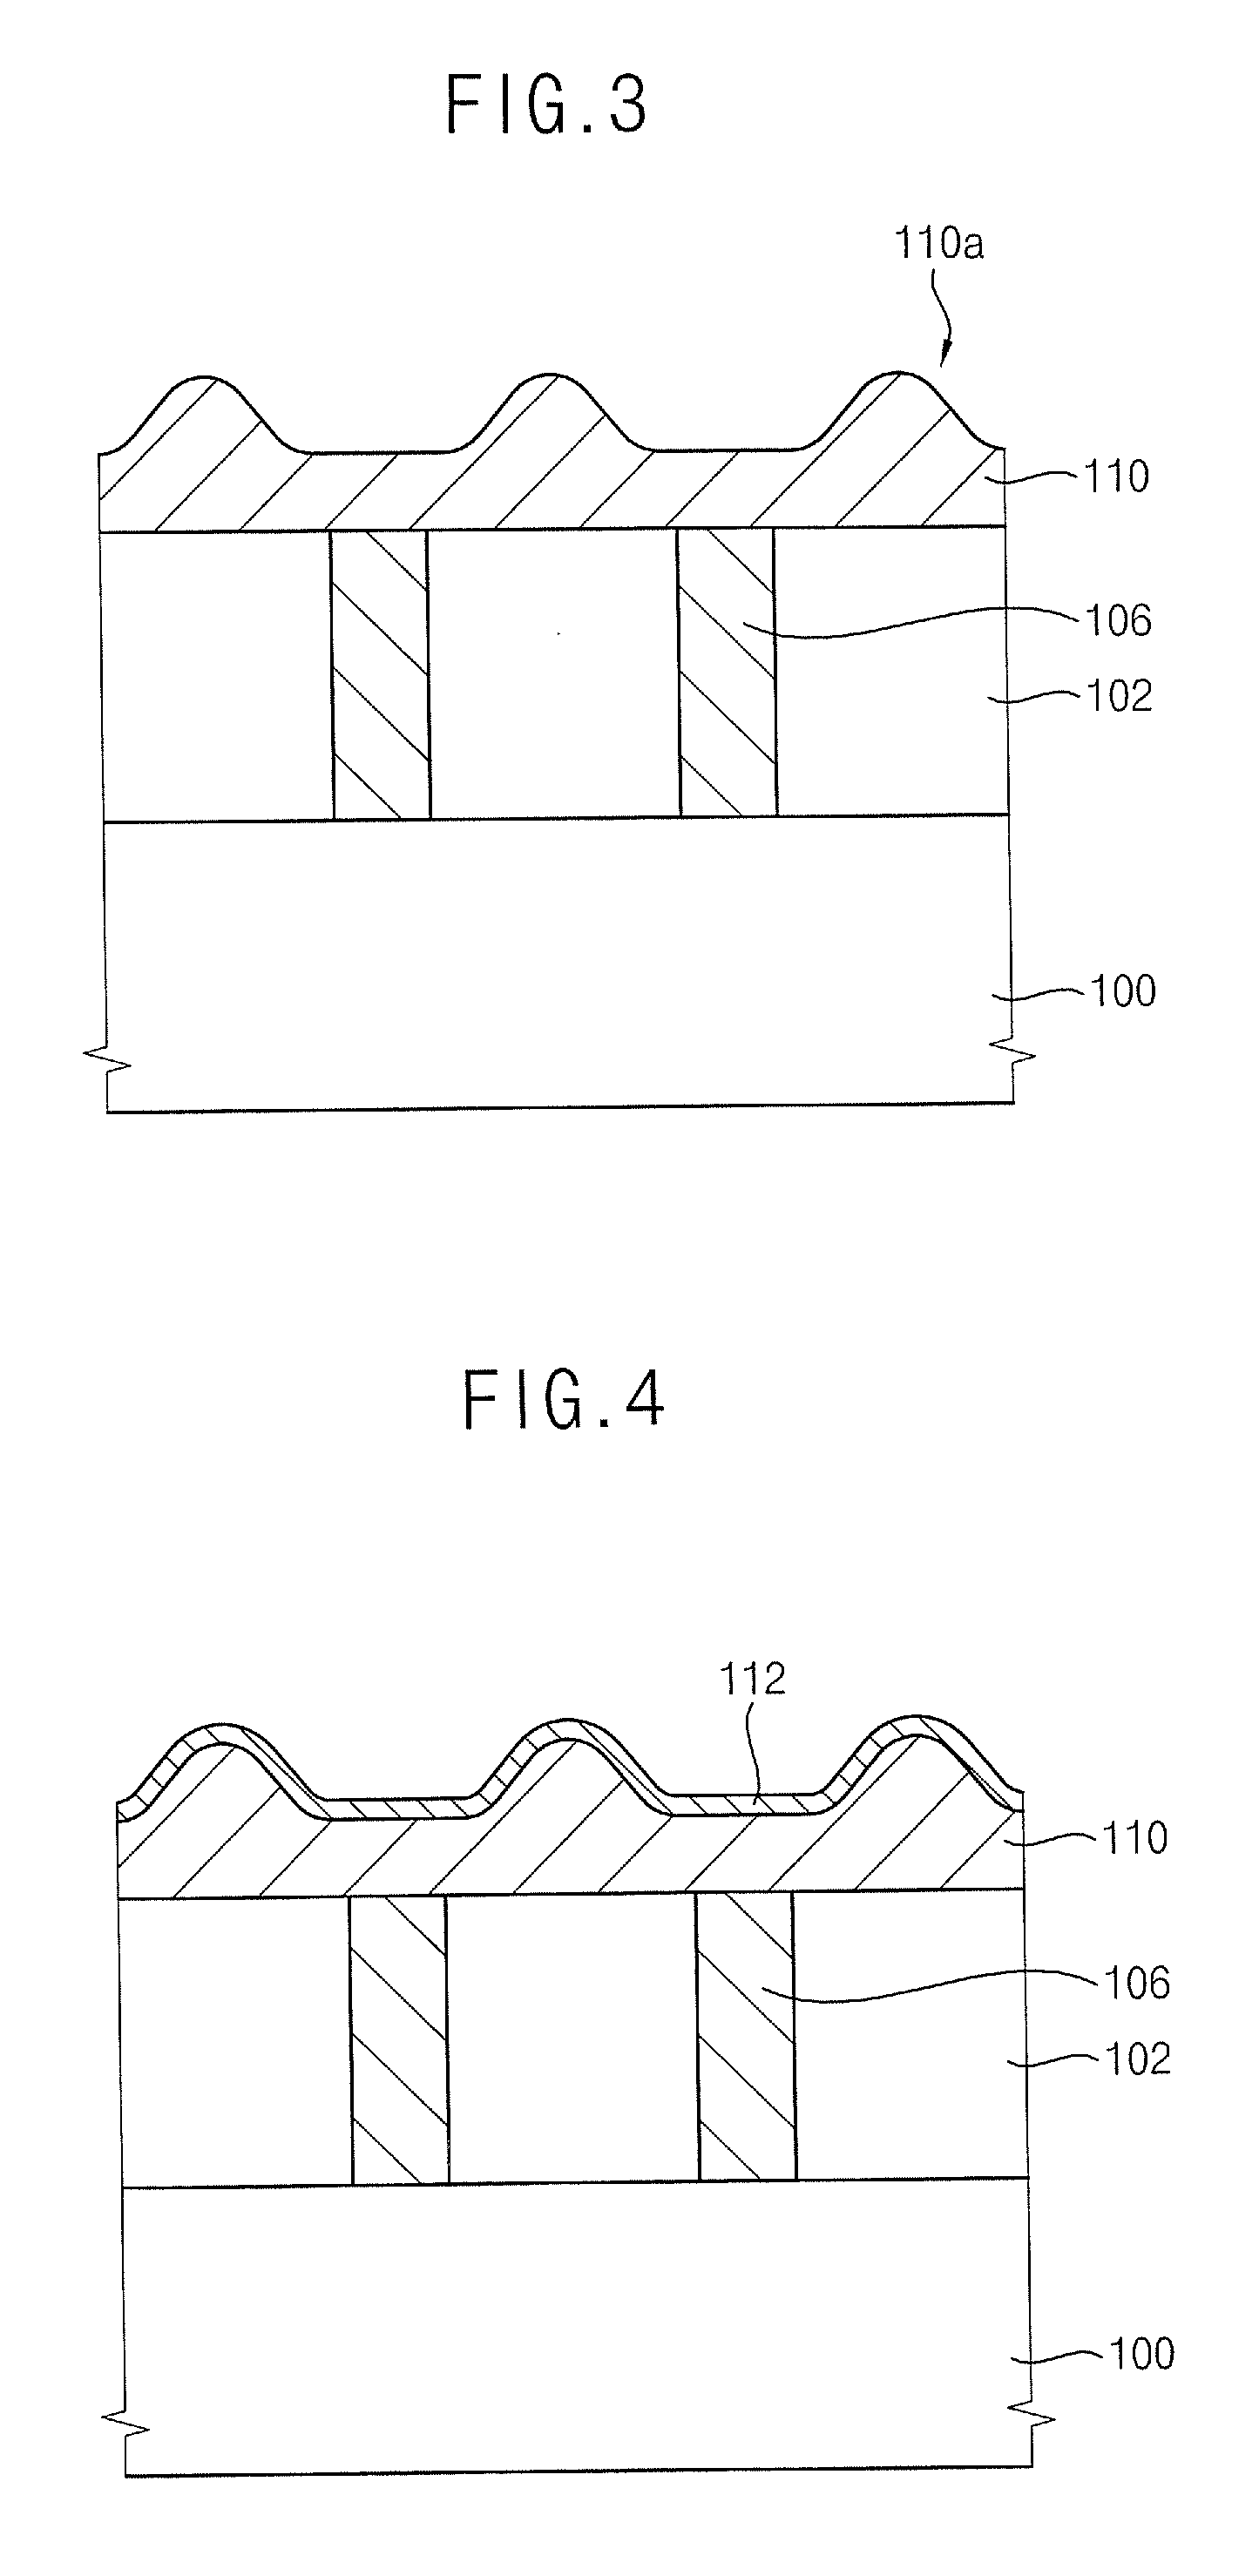 Methods of fabricating semiconductor devices including channel layers having improved defect density and surface roughness characteristics